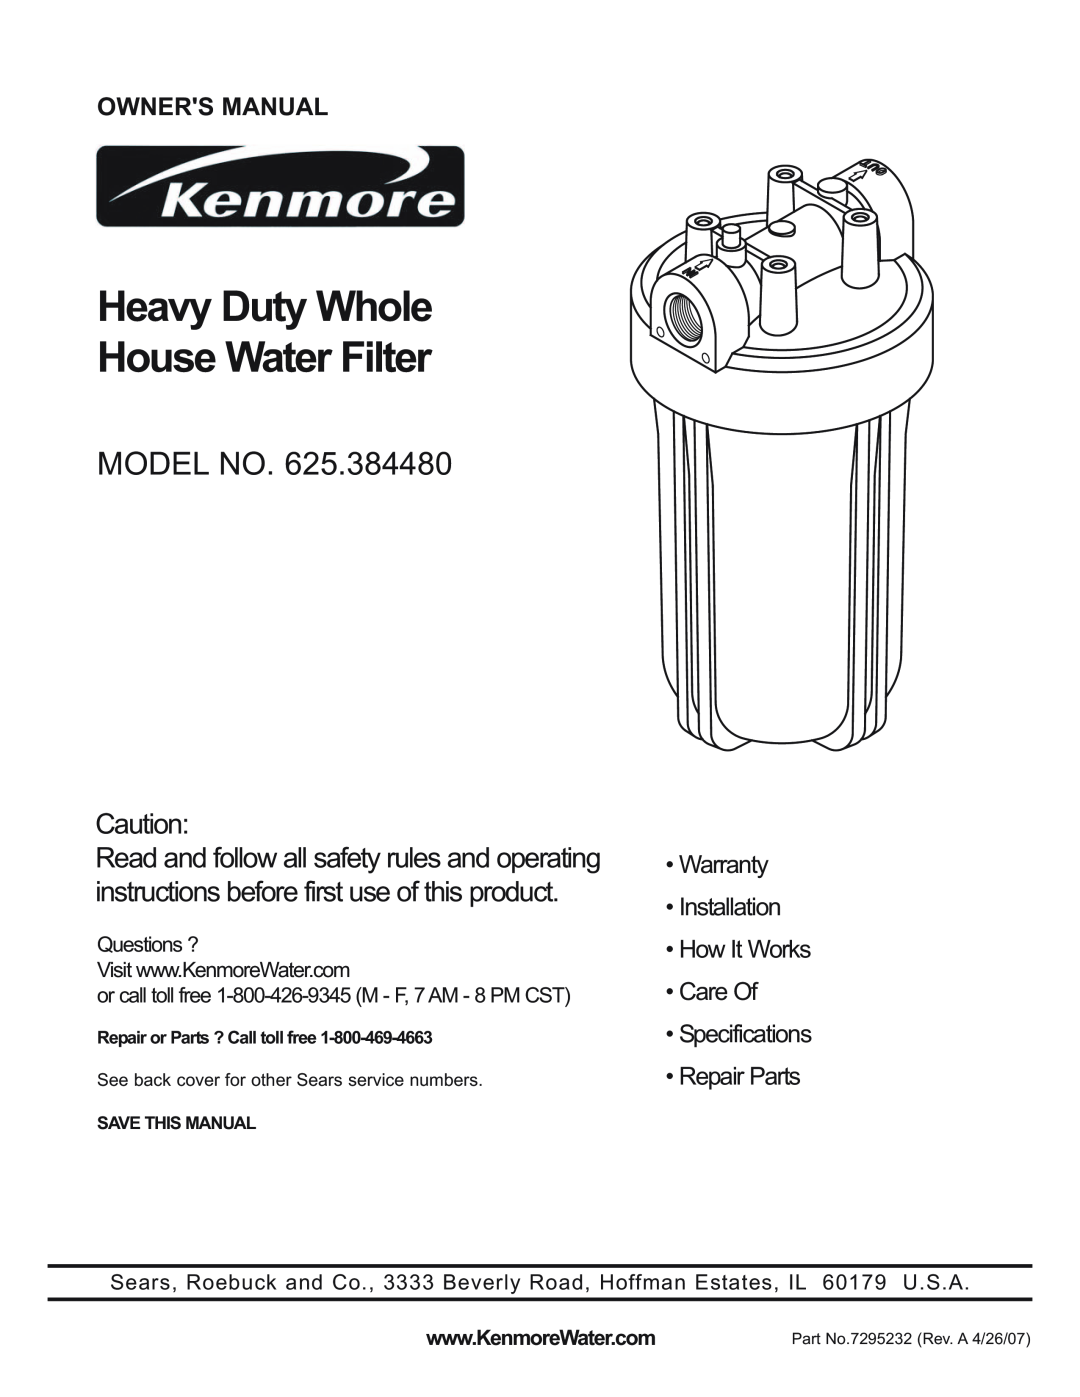 Kenmore 625.38448 owner manual Heavy Duty Whole House Water Filter, Model No, Questions ?, Save This Manual 